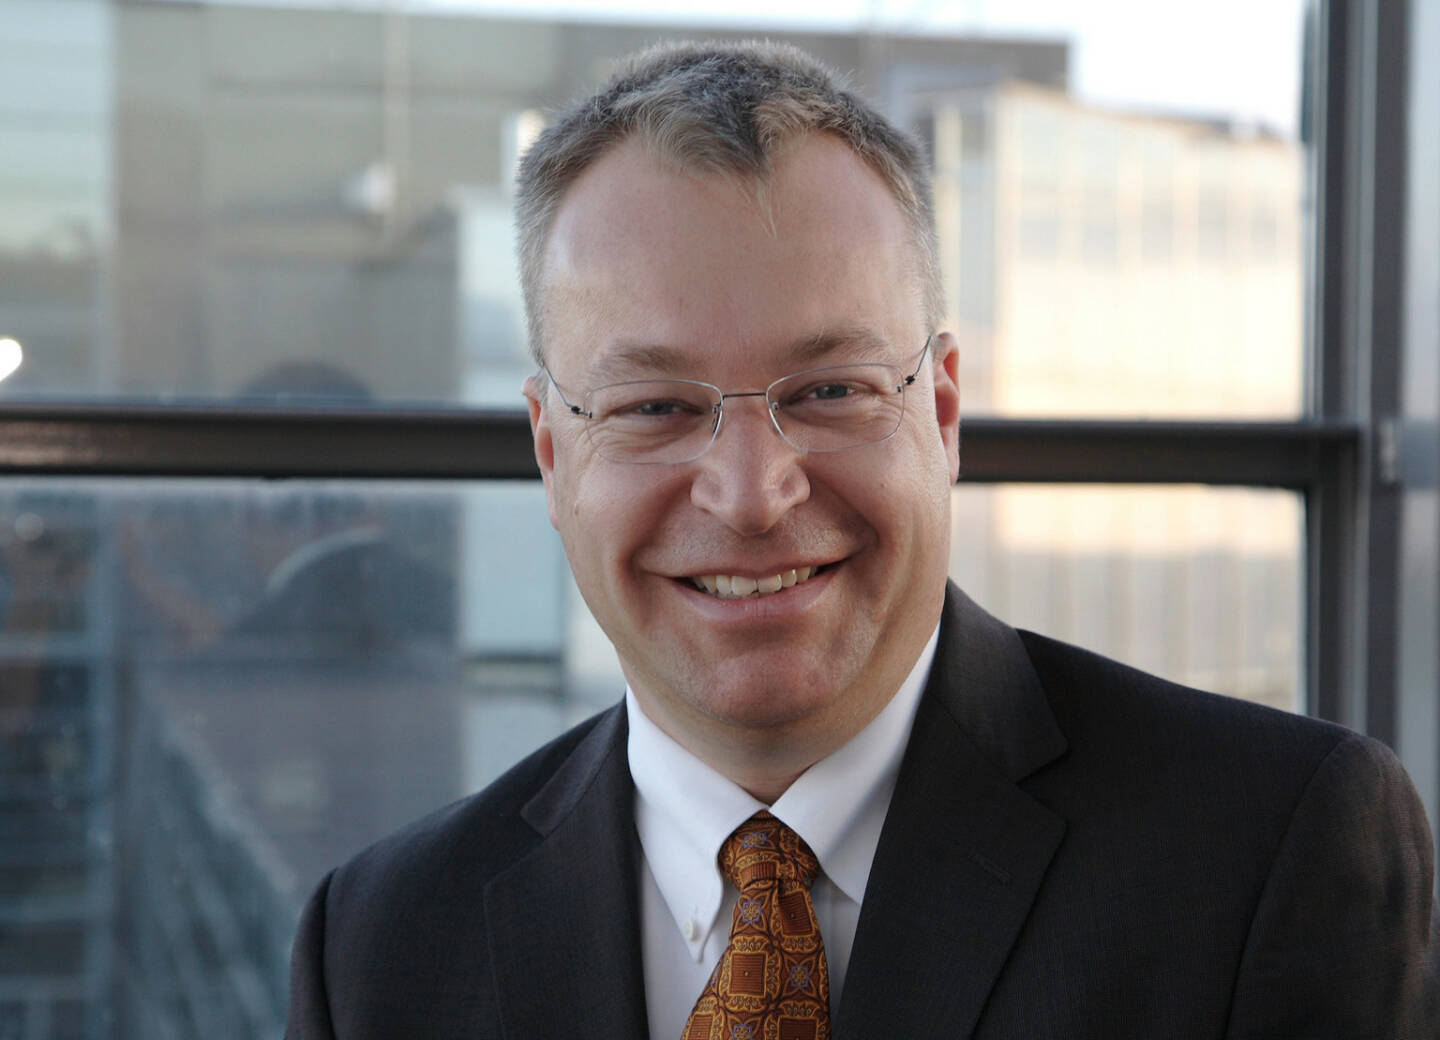 Stephen Elop, President and CEO of Nokia Corporation